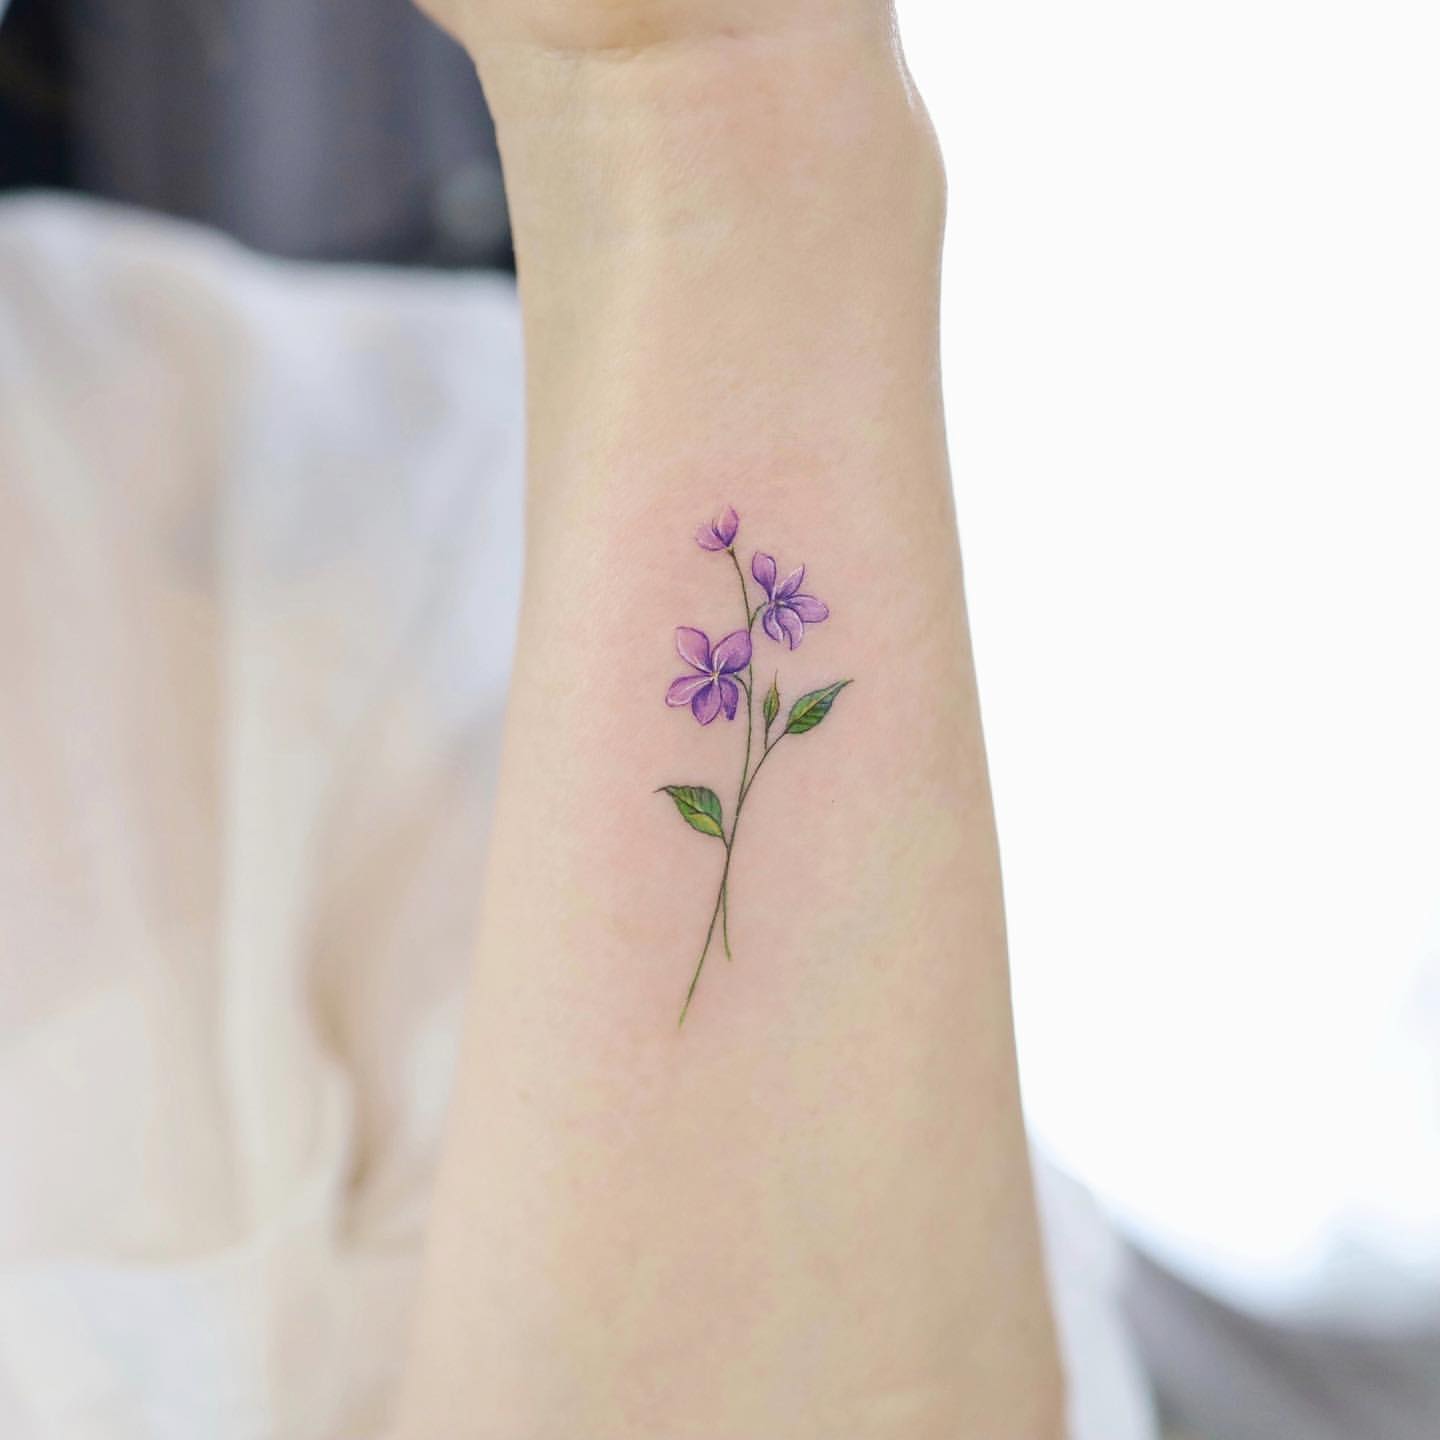 25 Intricate Small Flower Tattoo Designs and Ideas for Women   EntertainmentMesh